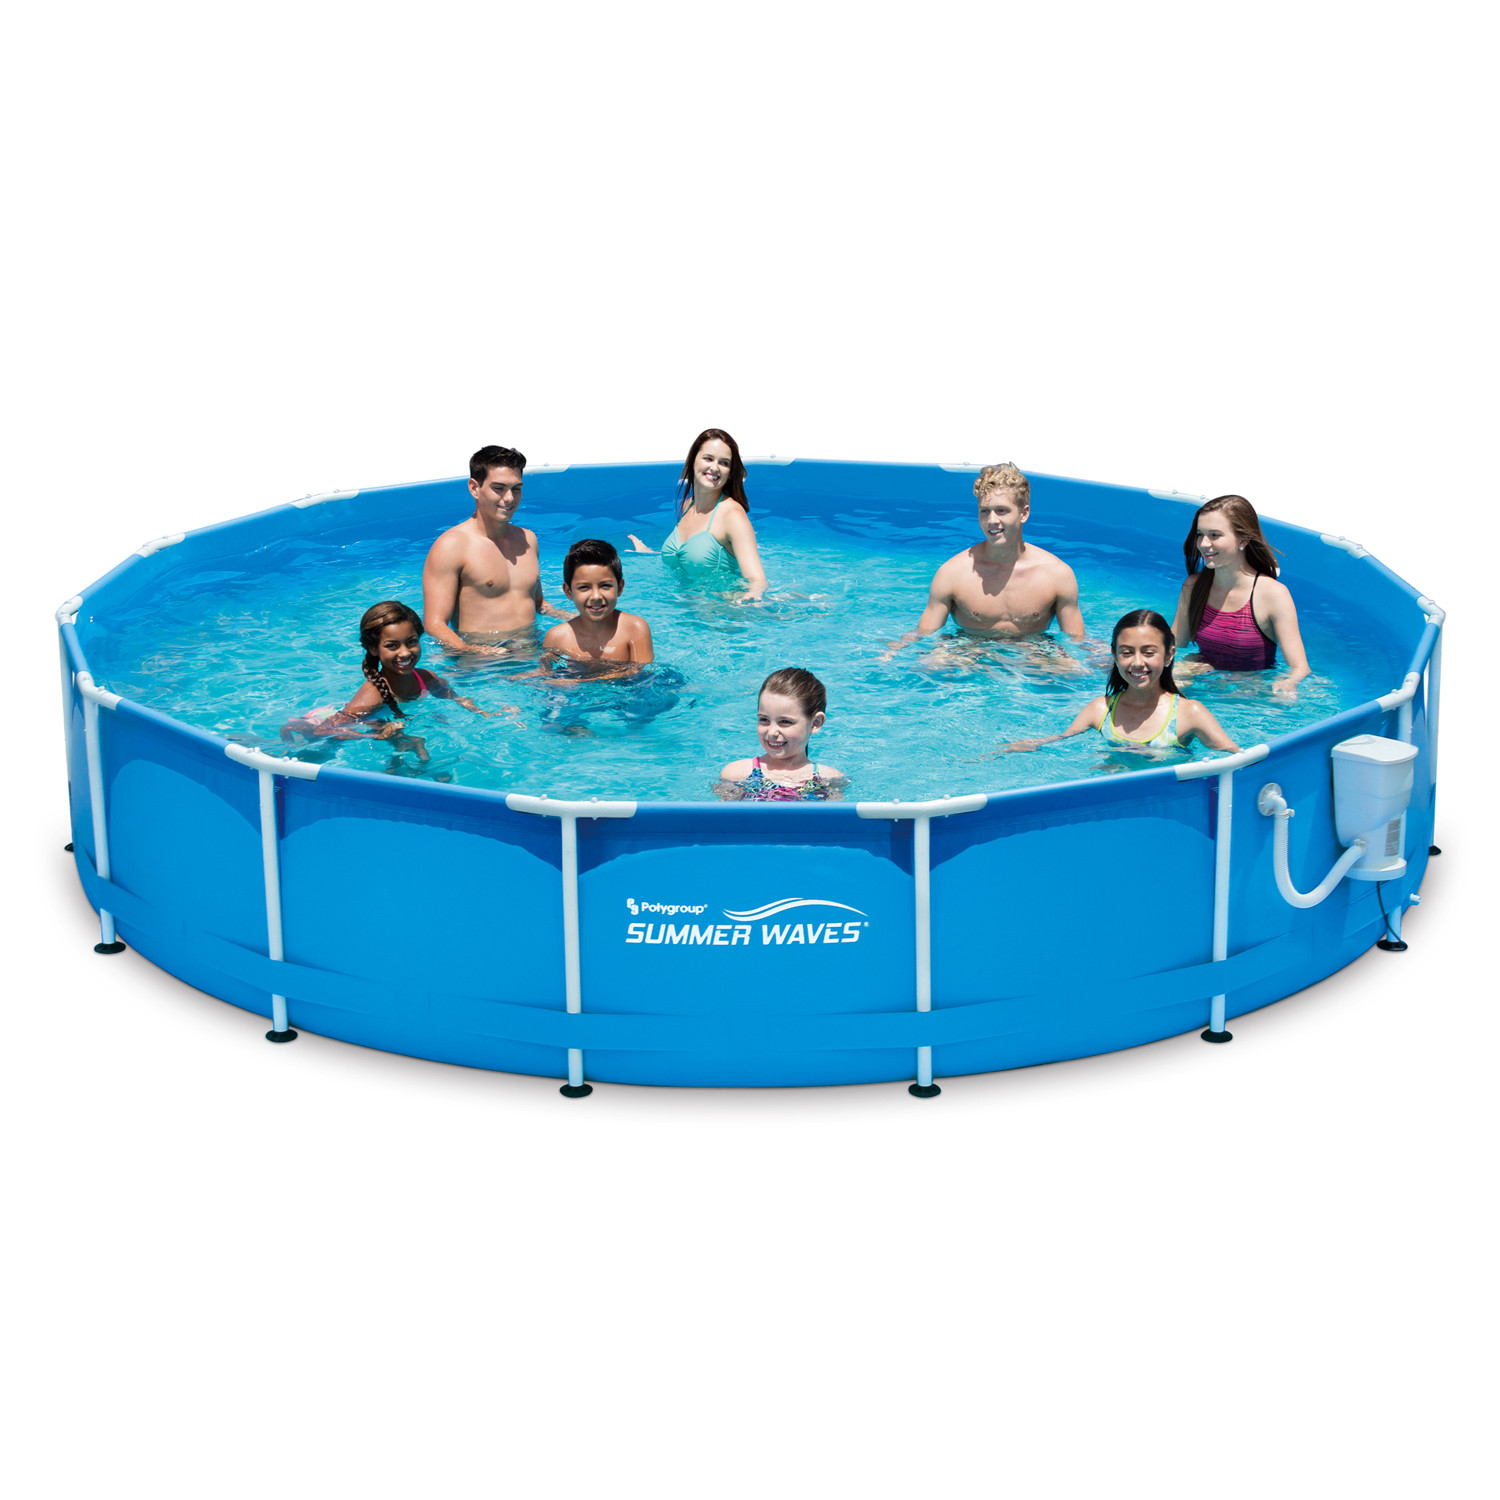 Summer Waves Above Ground Pool
 Summer Waves 15ft Active Metal Frame Pool with 600 GPH